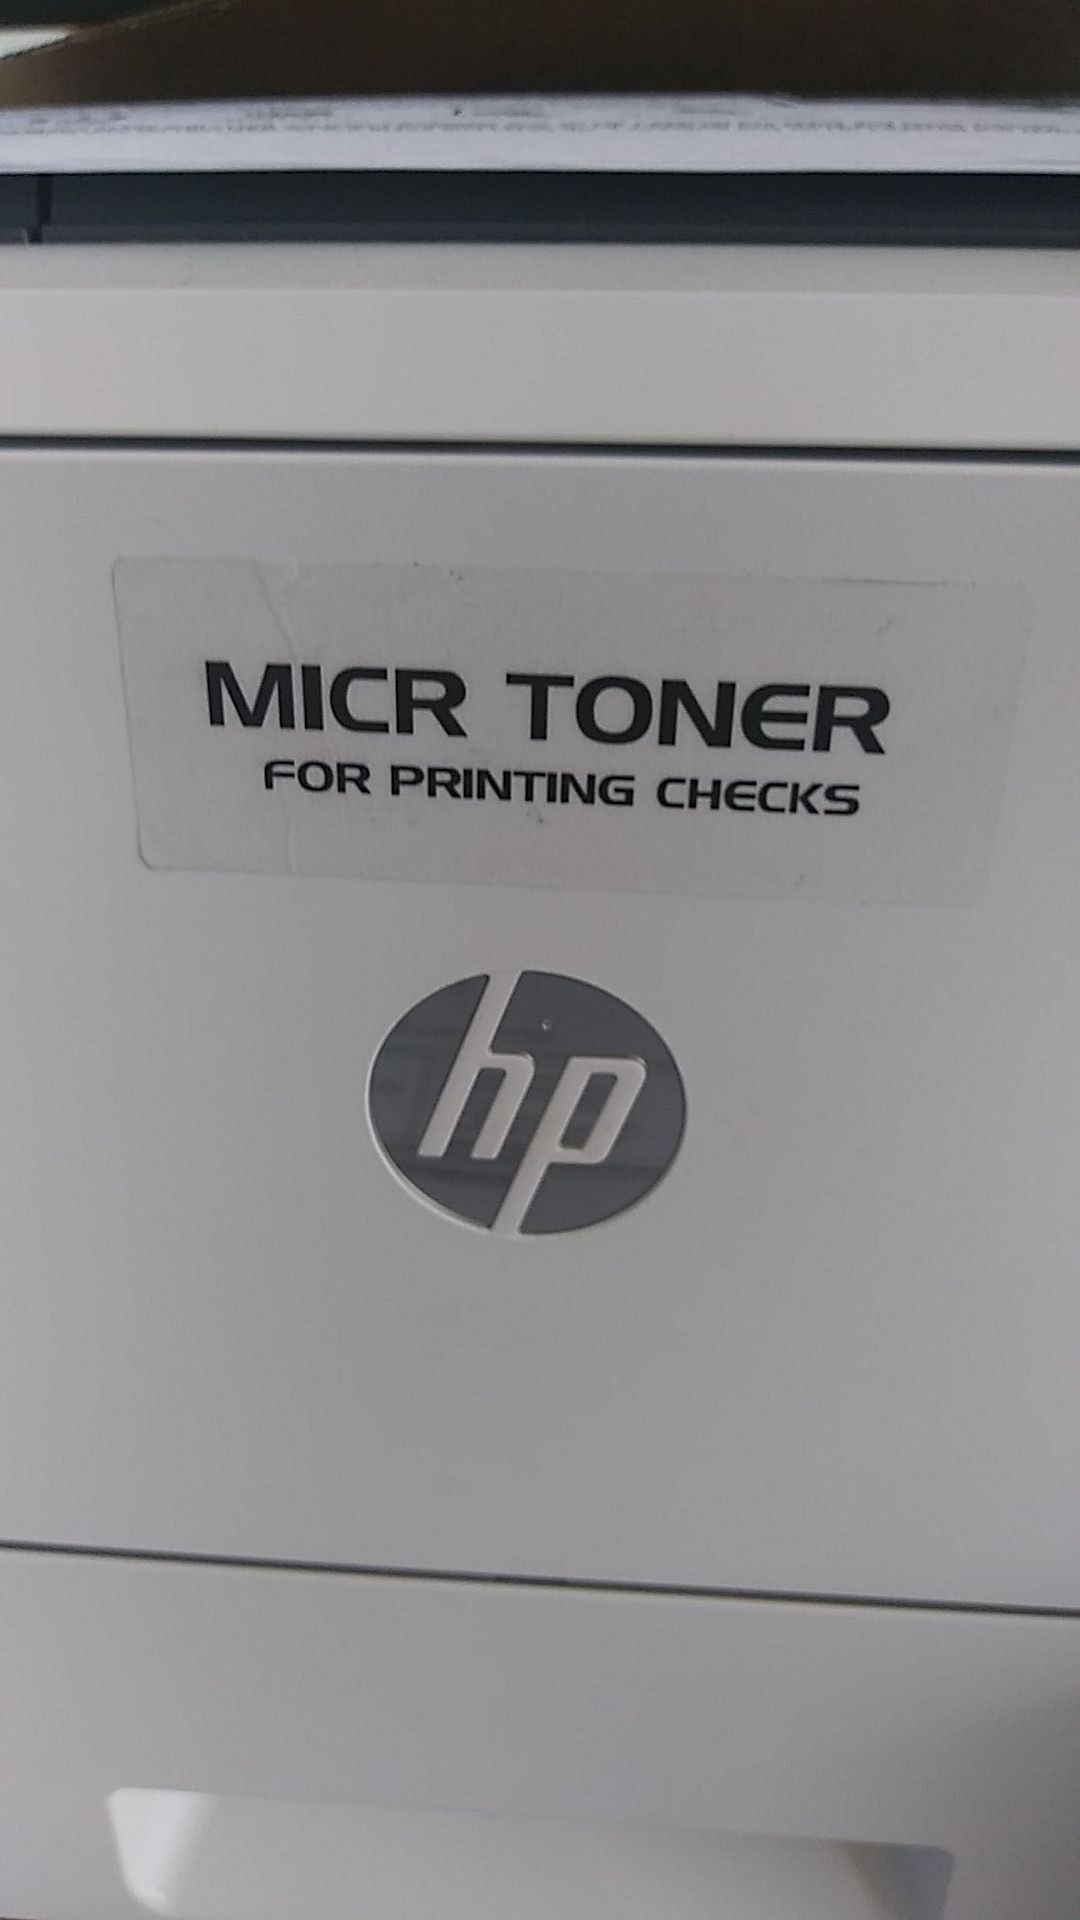 New HP check printing printer with New magnetic toner